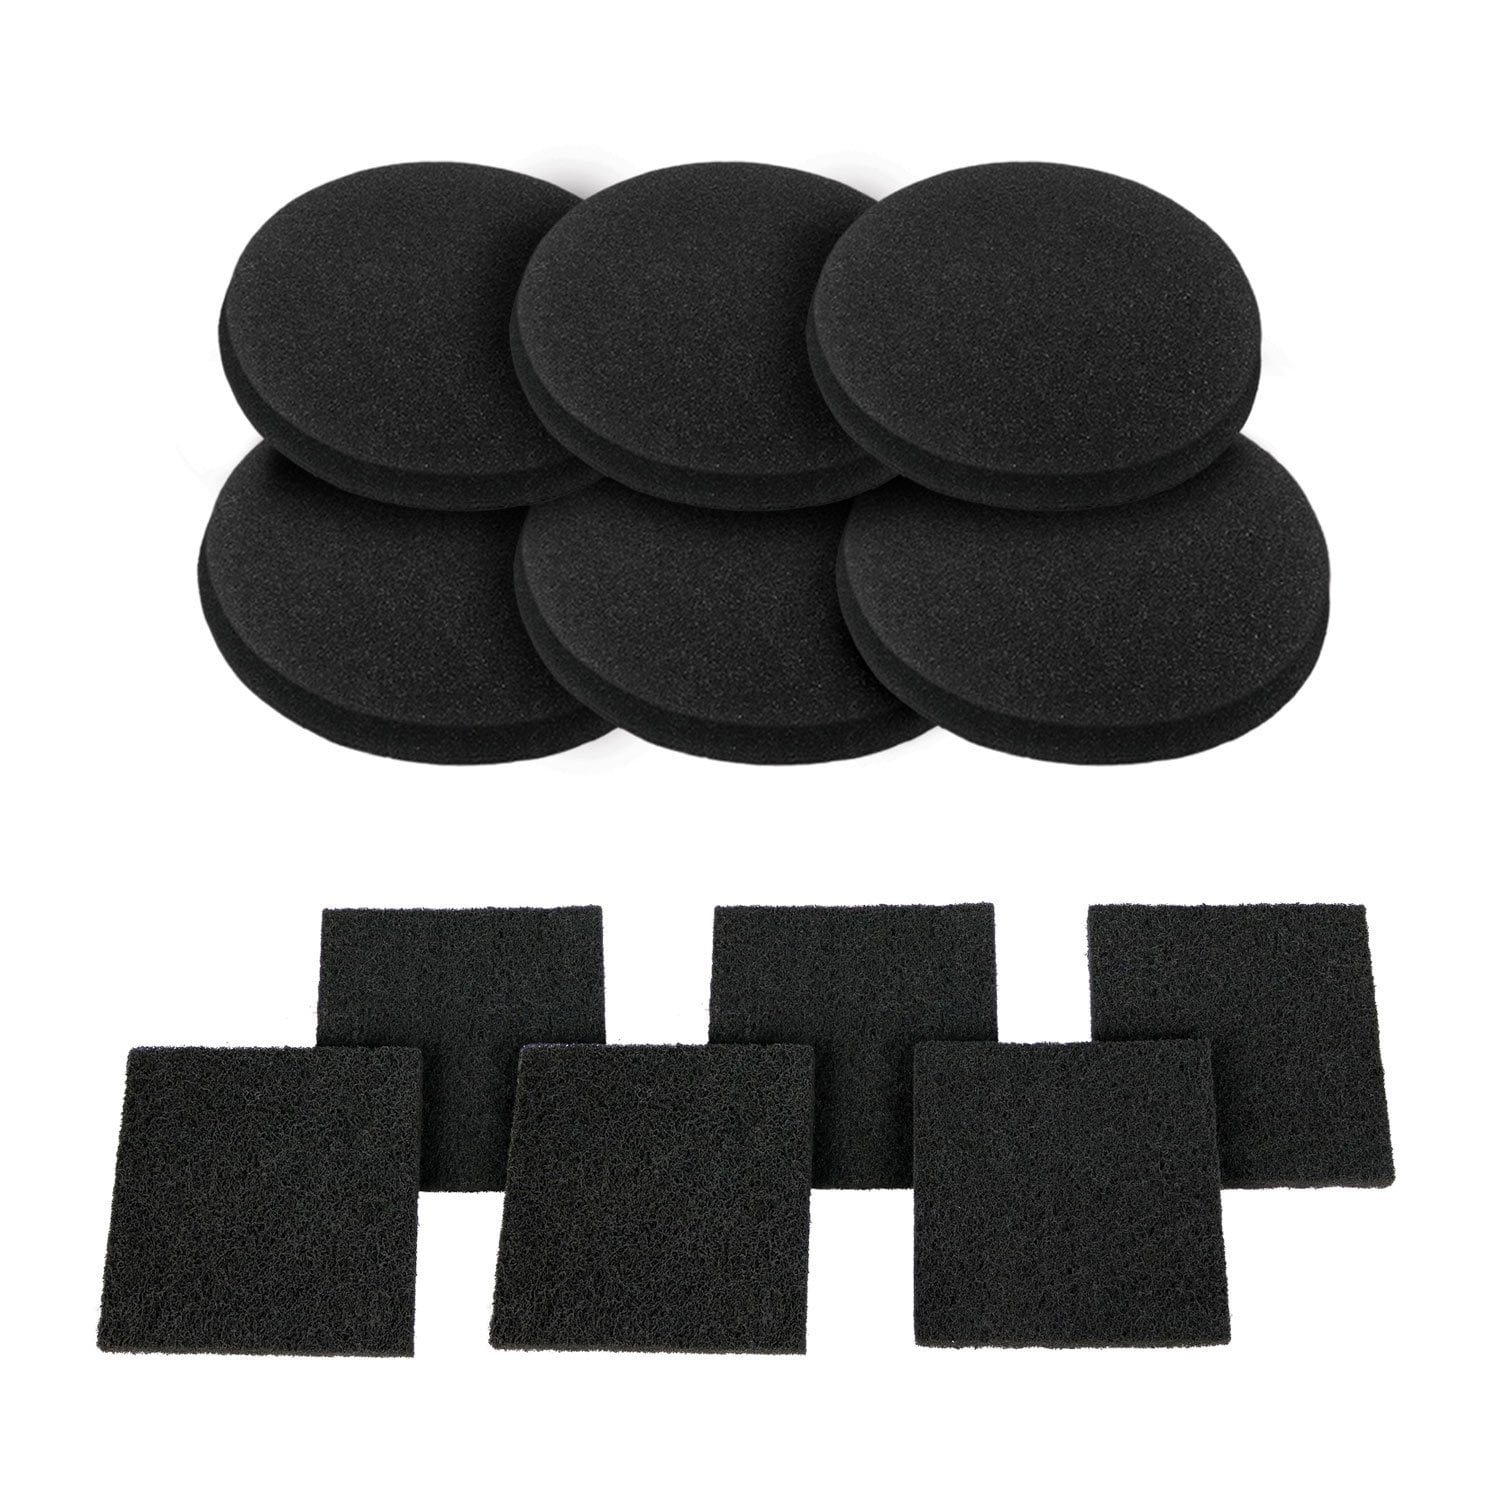 12 Pieces Activated Carbon Filters Compost Bin Replacement Filters Housewares Solutions 